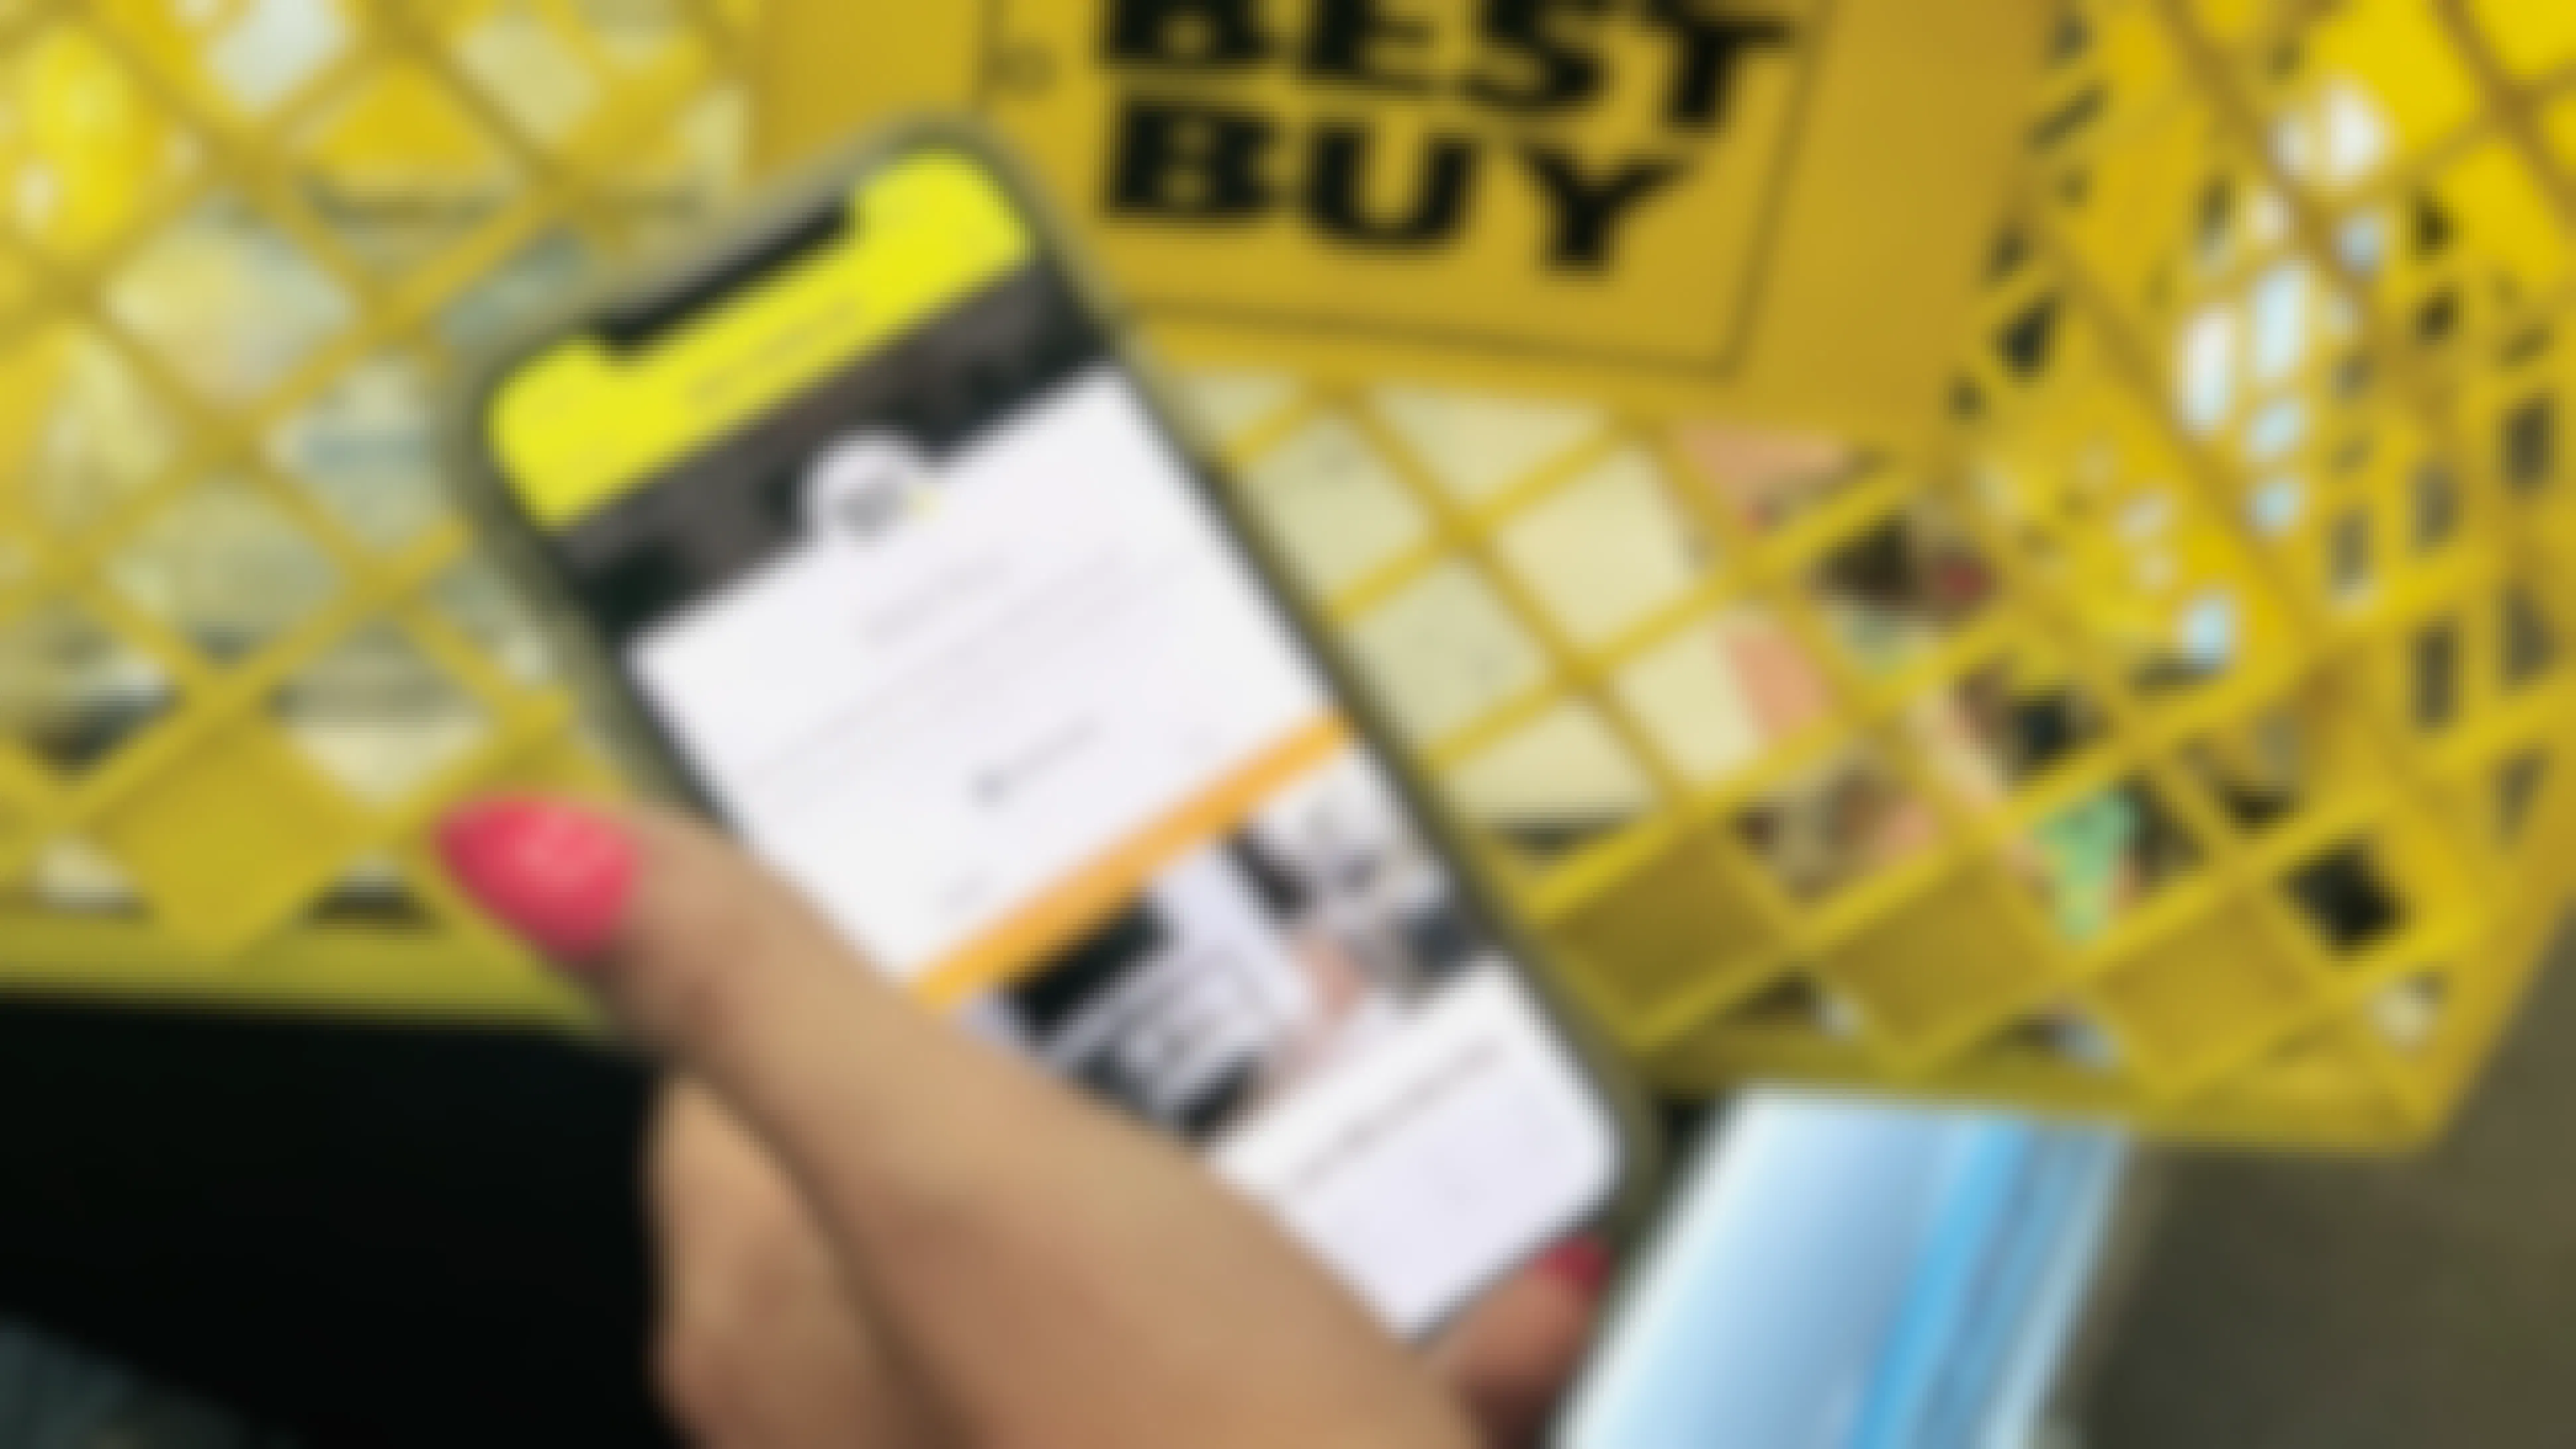 hand holds an iphone open to the KCL app with Best Buy selected